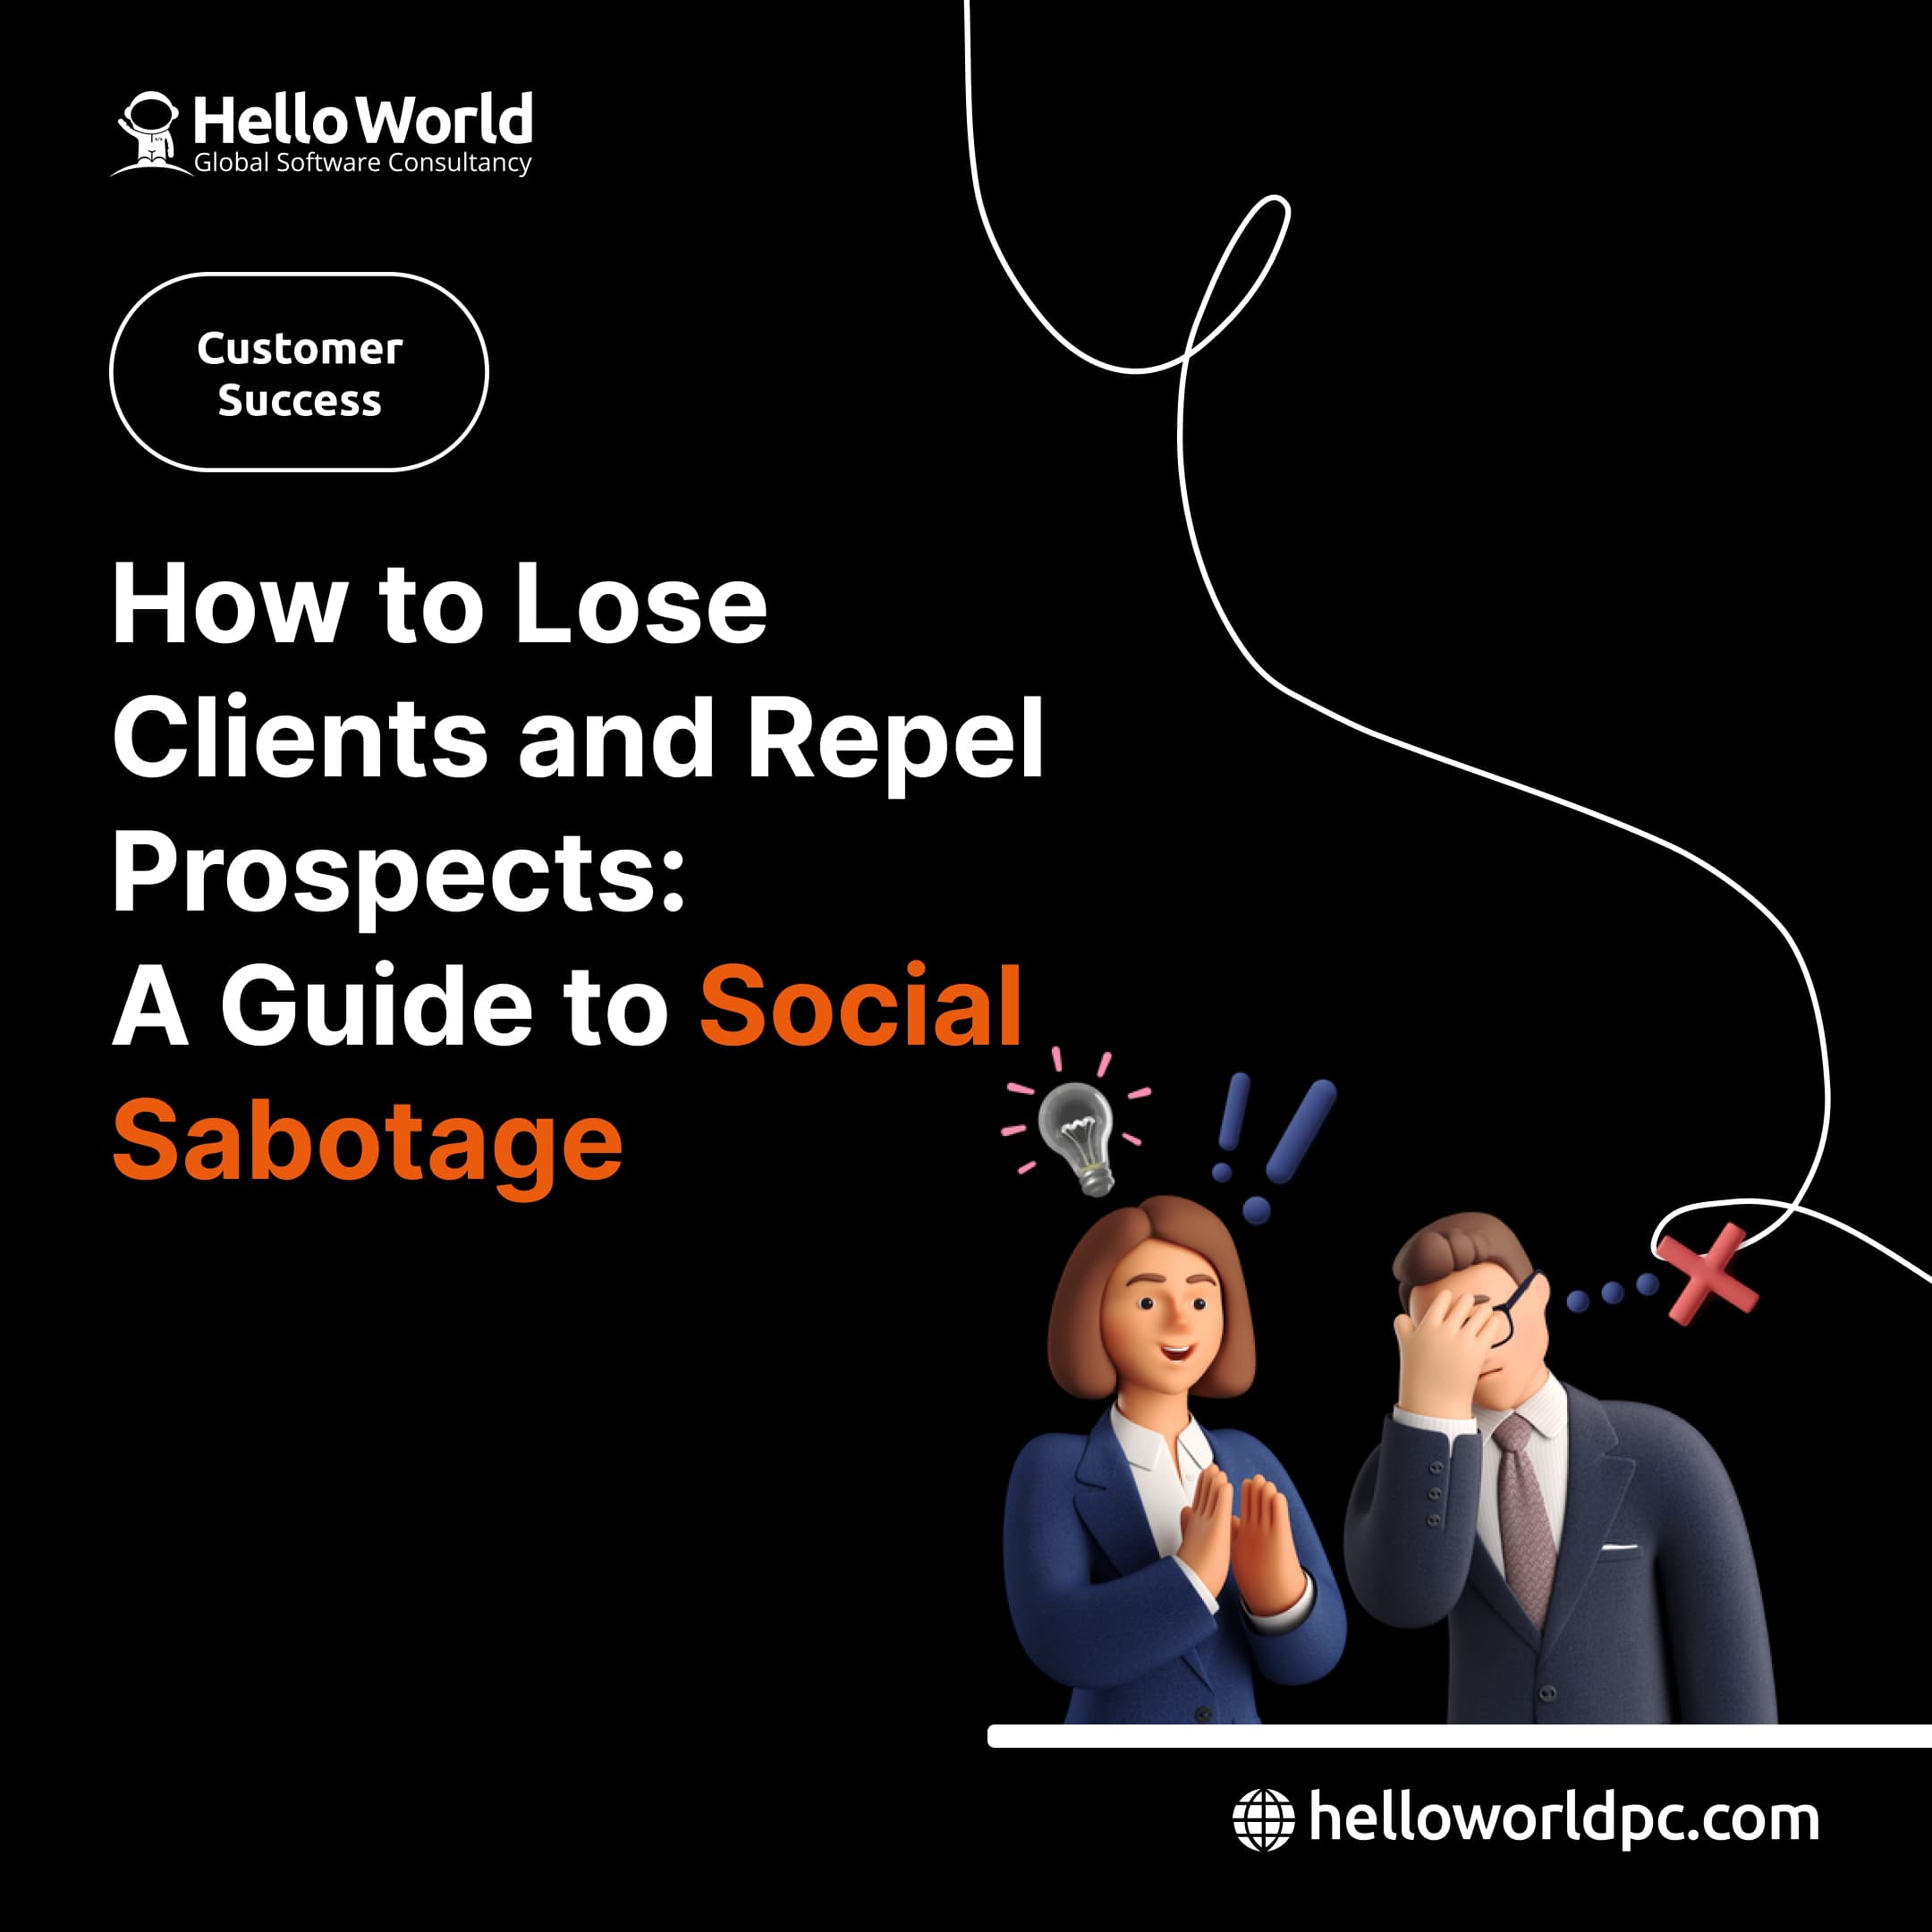 How to Lose Clients and Repel Prospects: A Guide to Social Sabotage